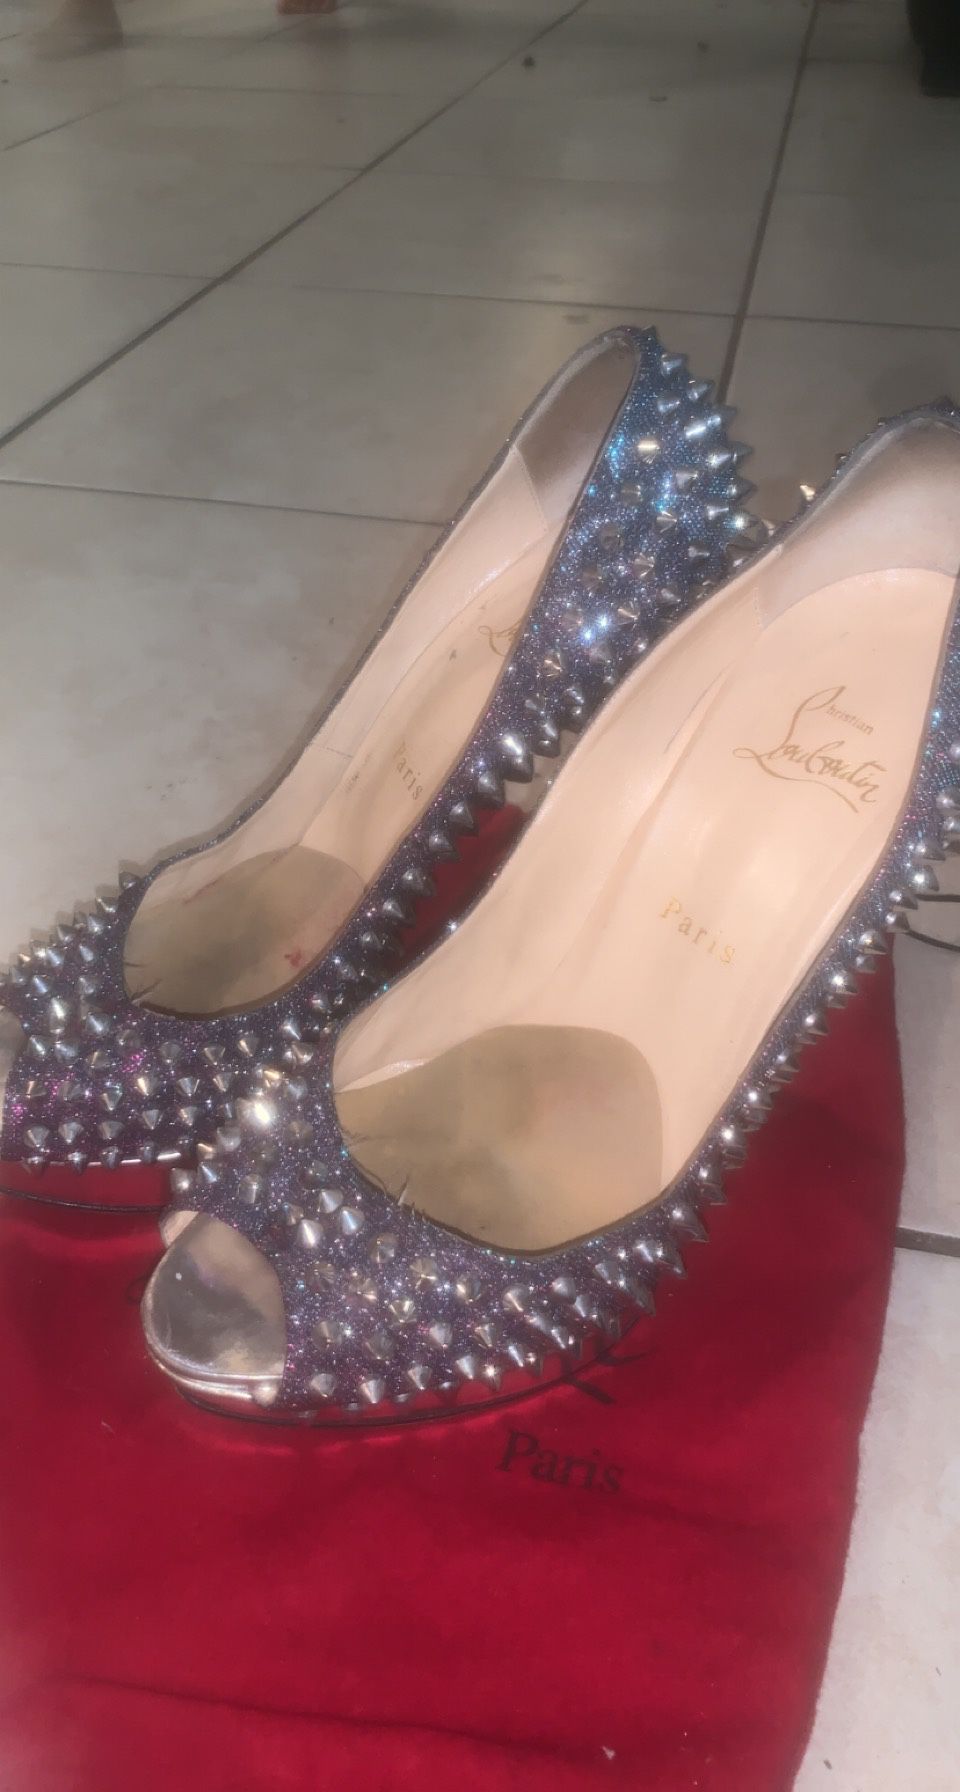 Authentic Christian Louboutin Heels